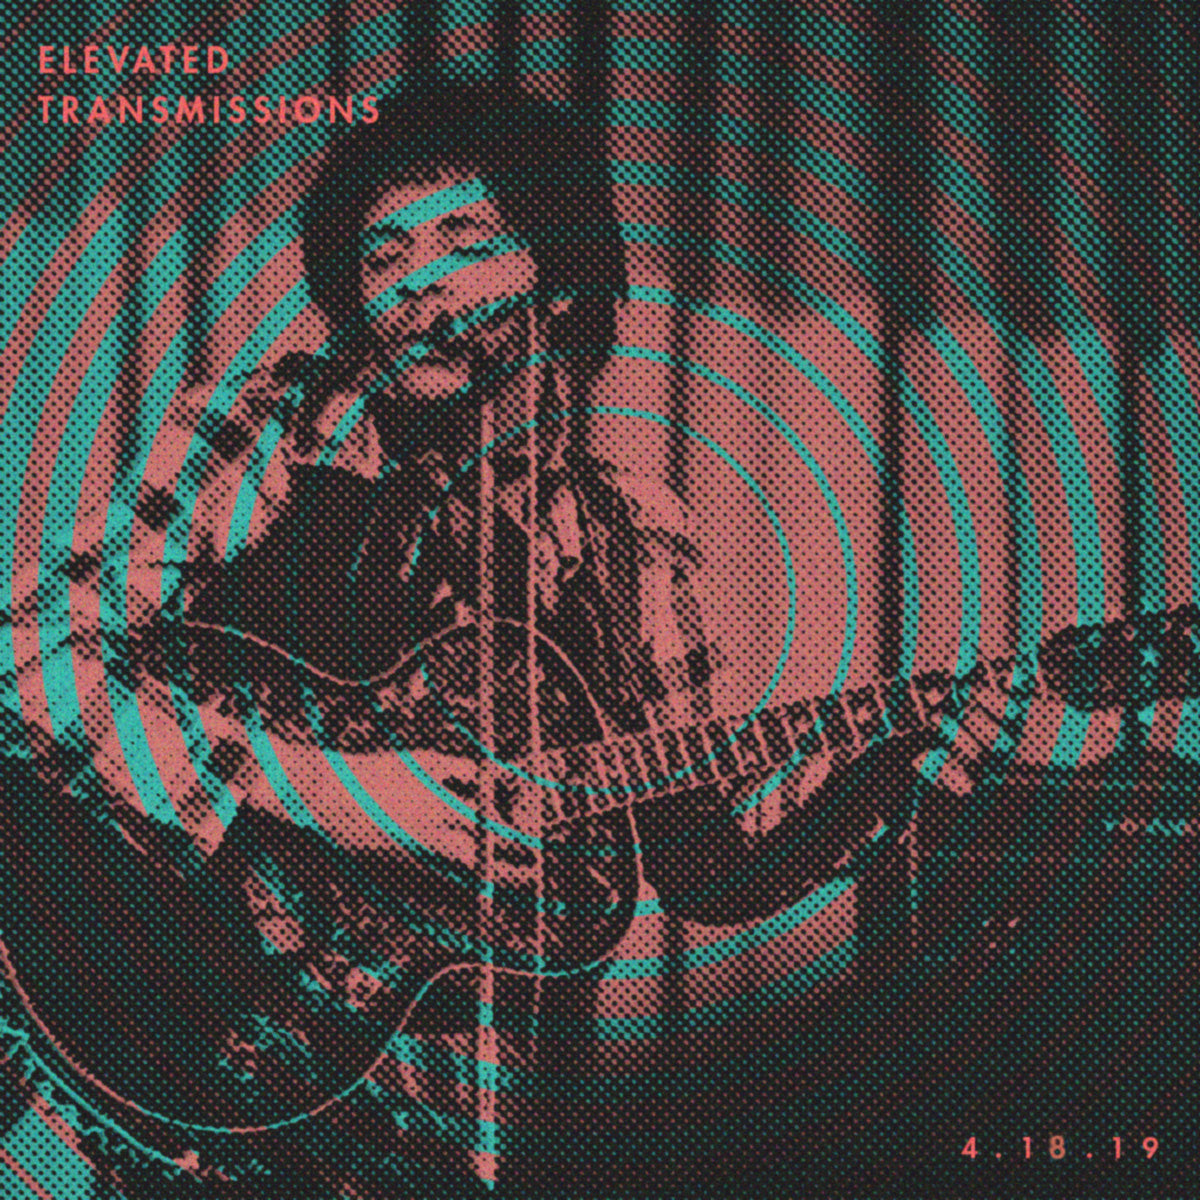 ELEVATED TRANSMISSIONS | 4.18.19